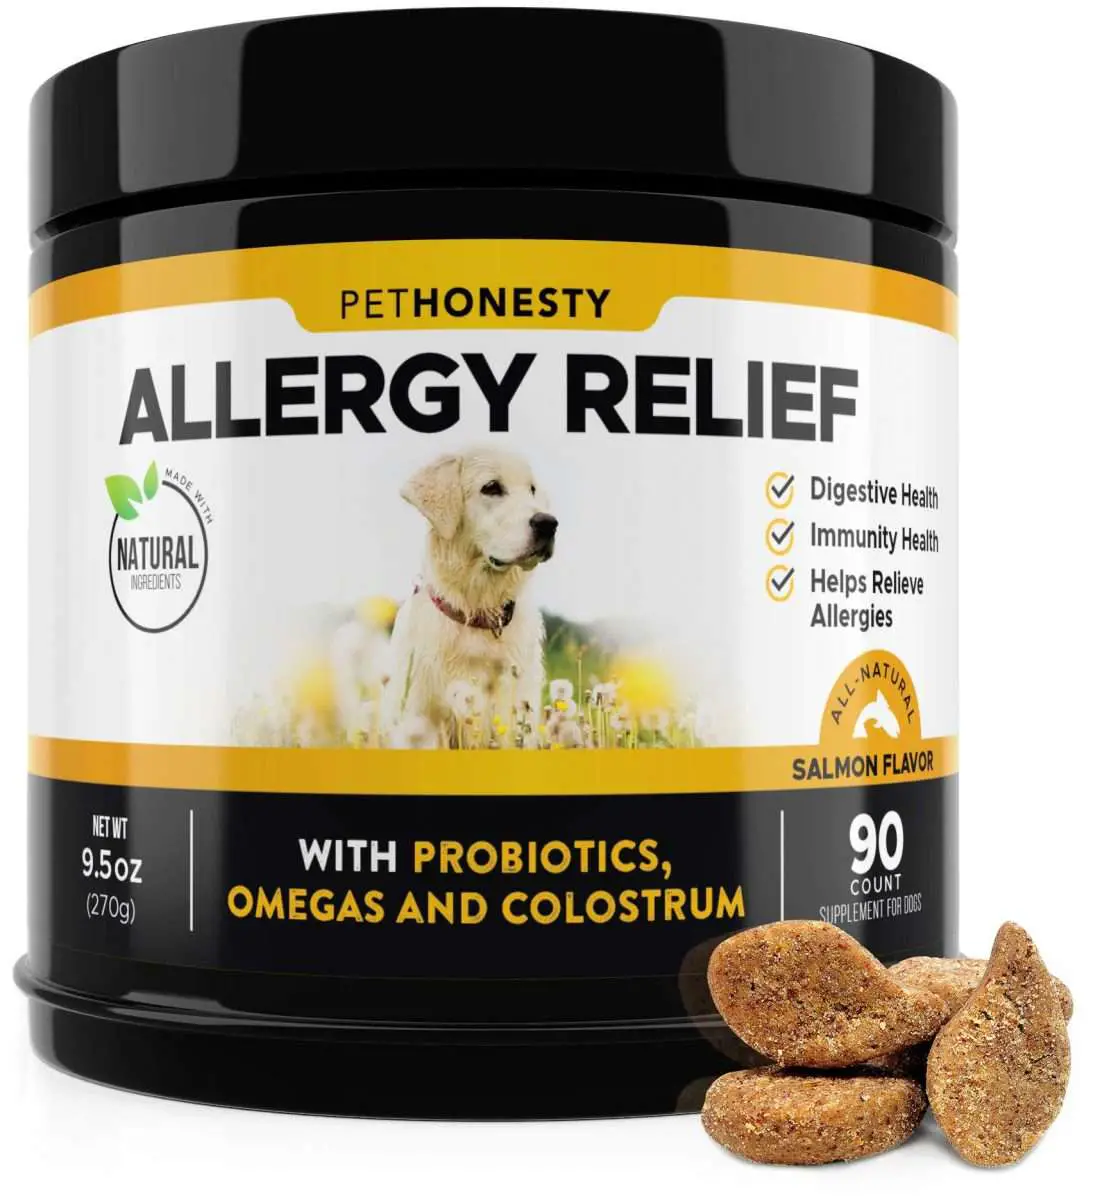 PetHonesty Allergy Relief Immunity Supplement for Dogs